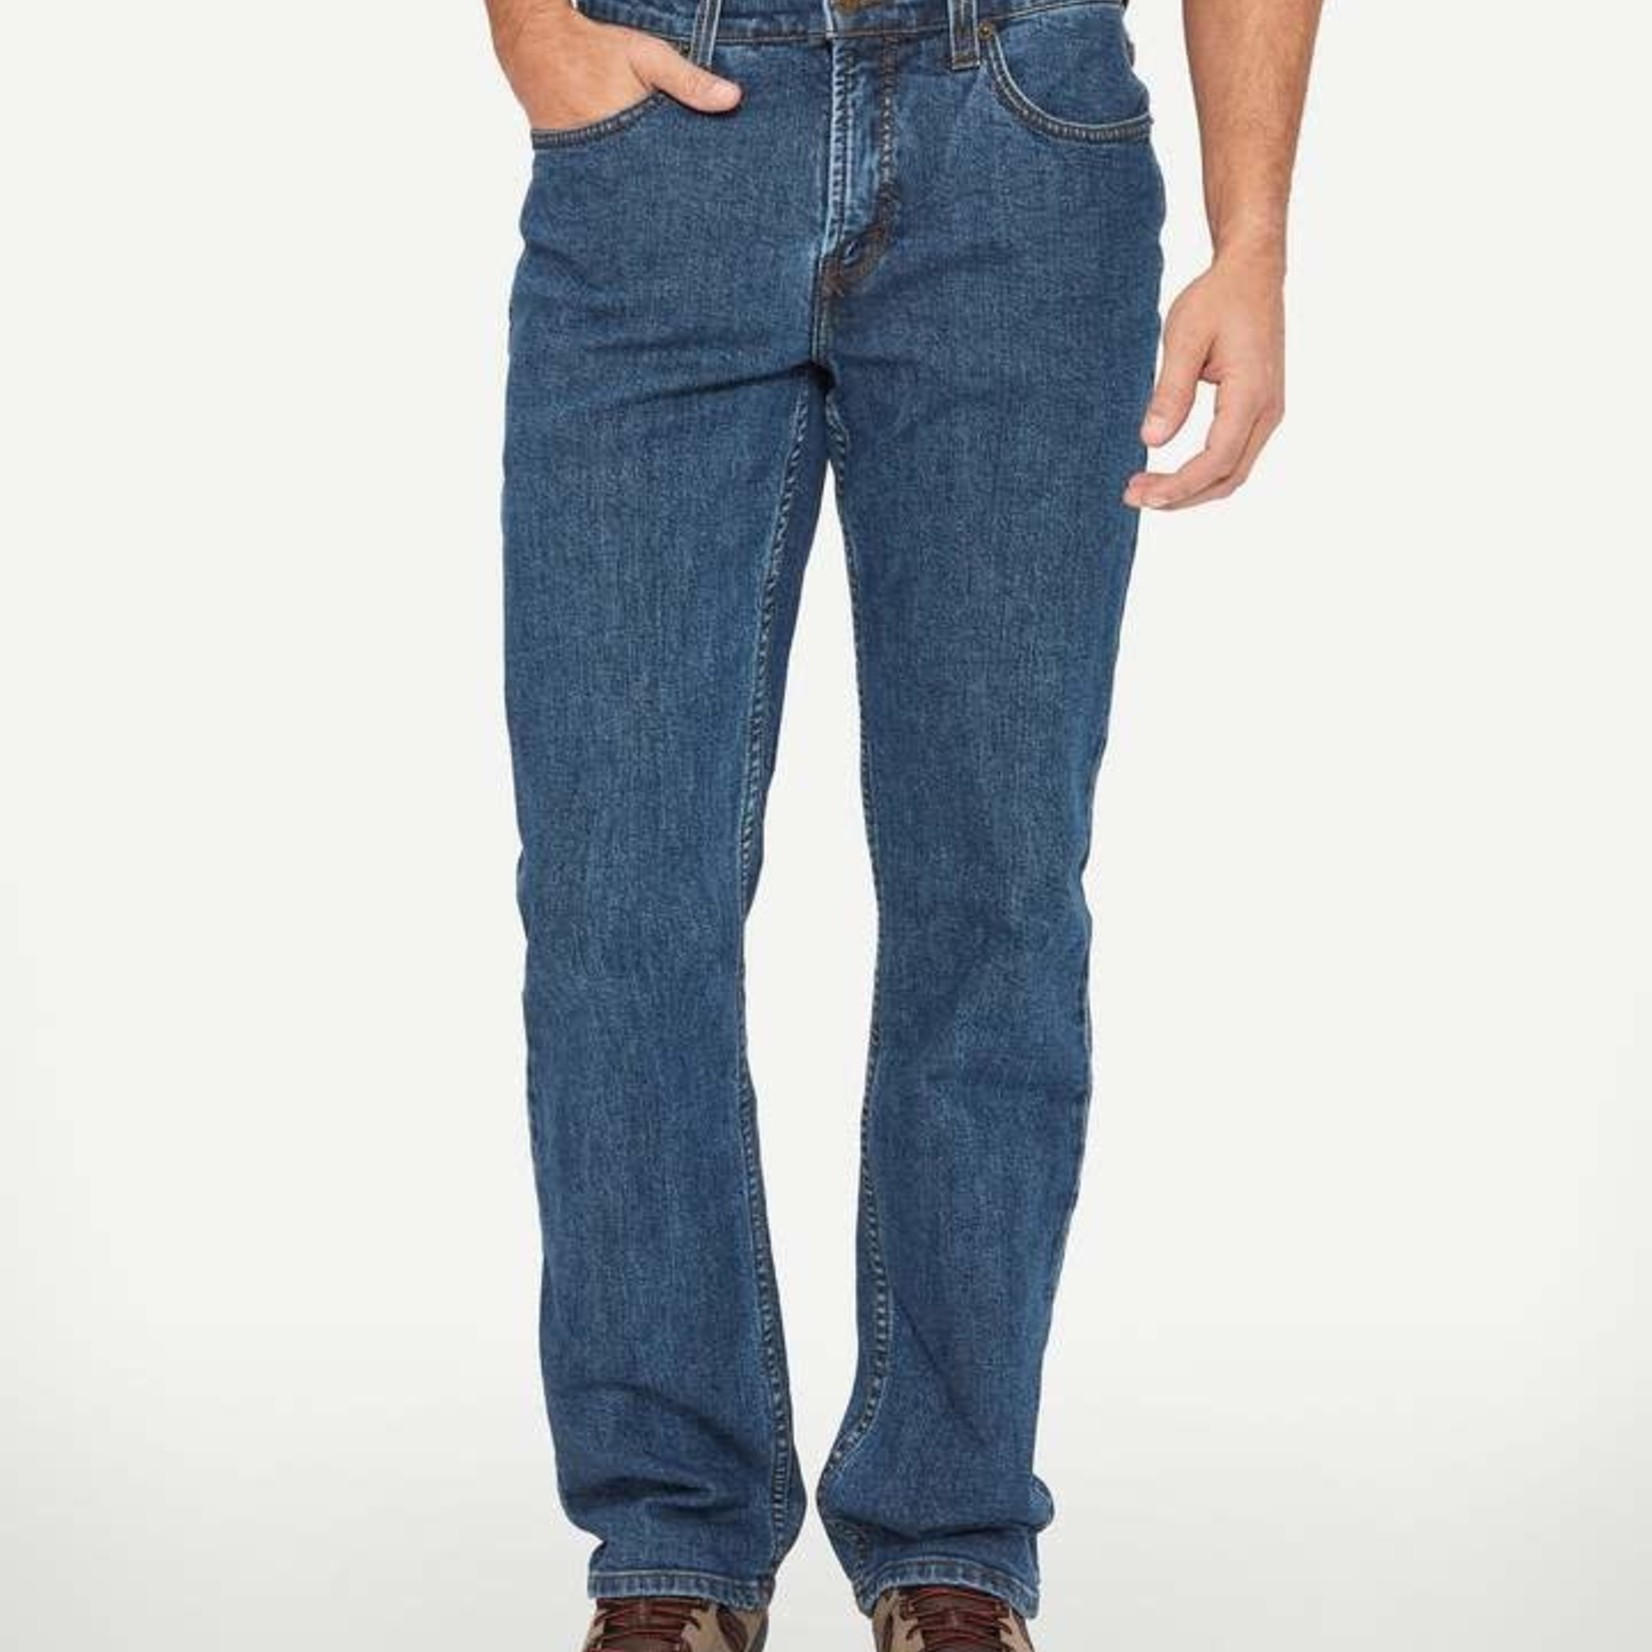 Lois Jeans - Brad-L (1116-1015-05) - Ford and McIntyre Men's Wear